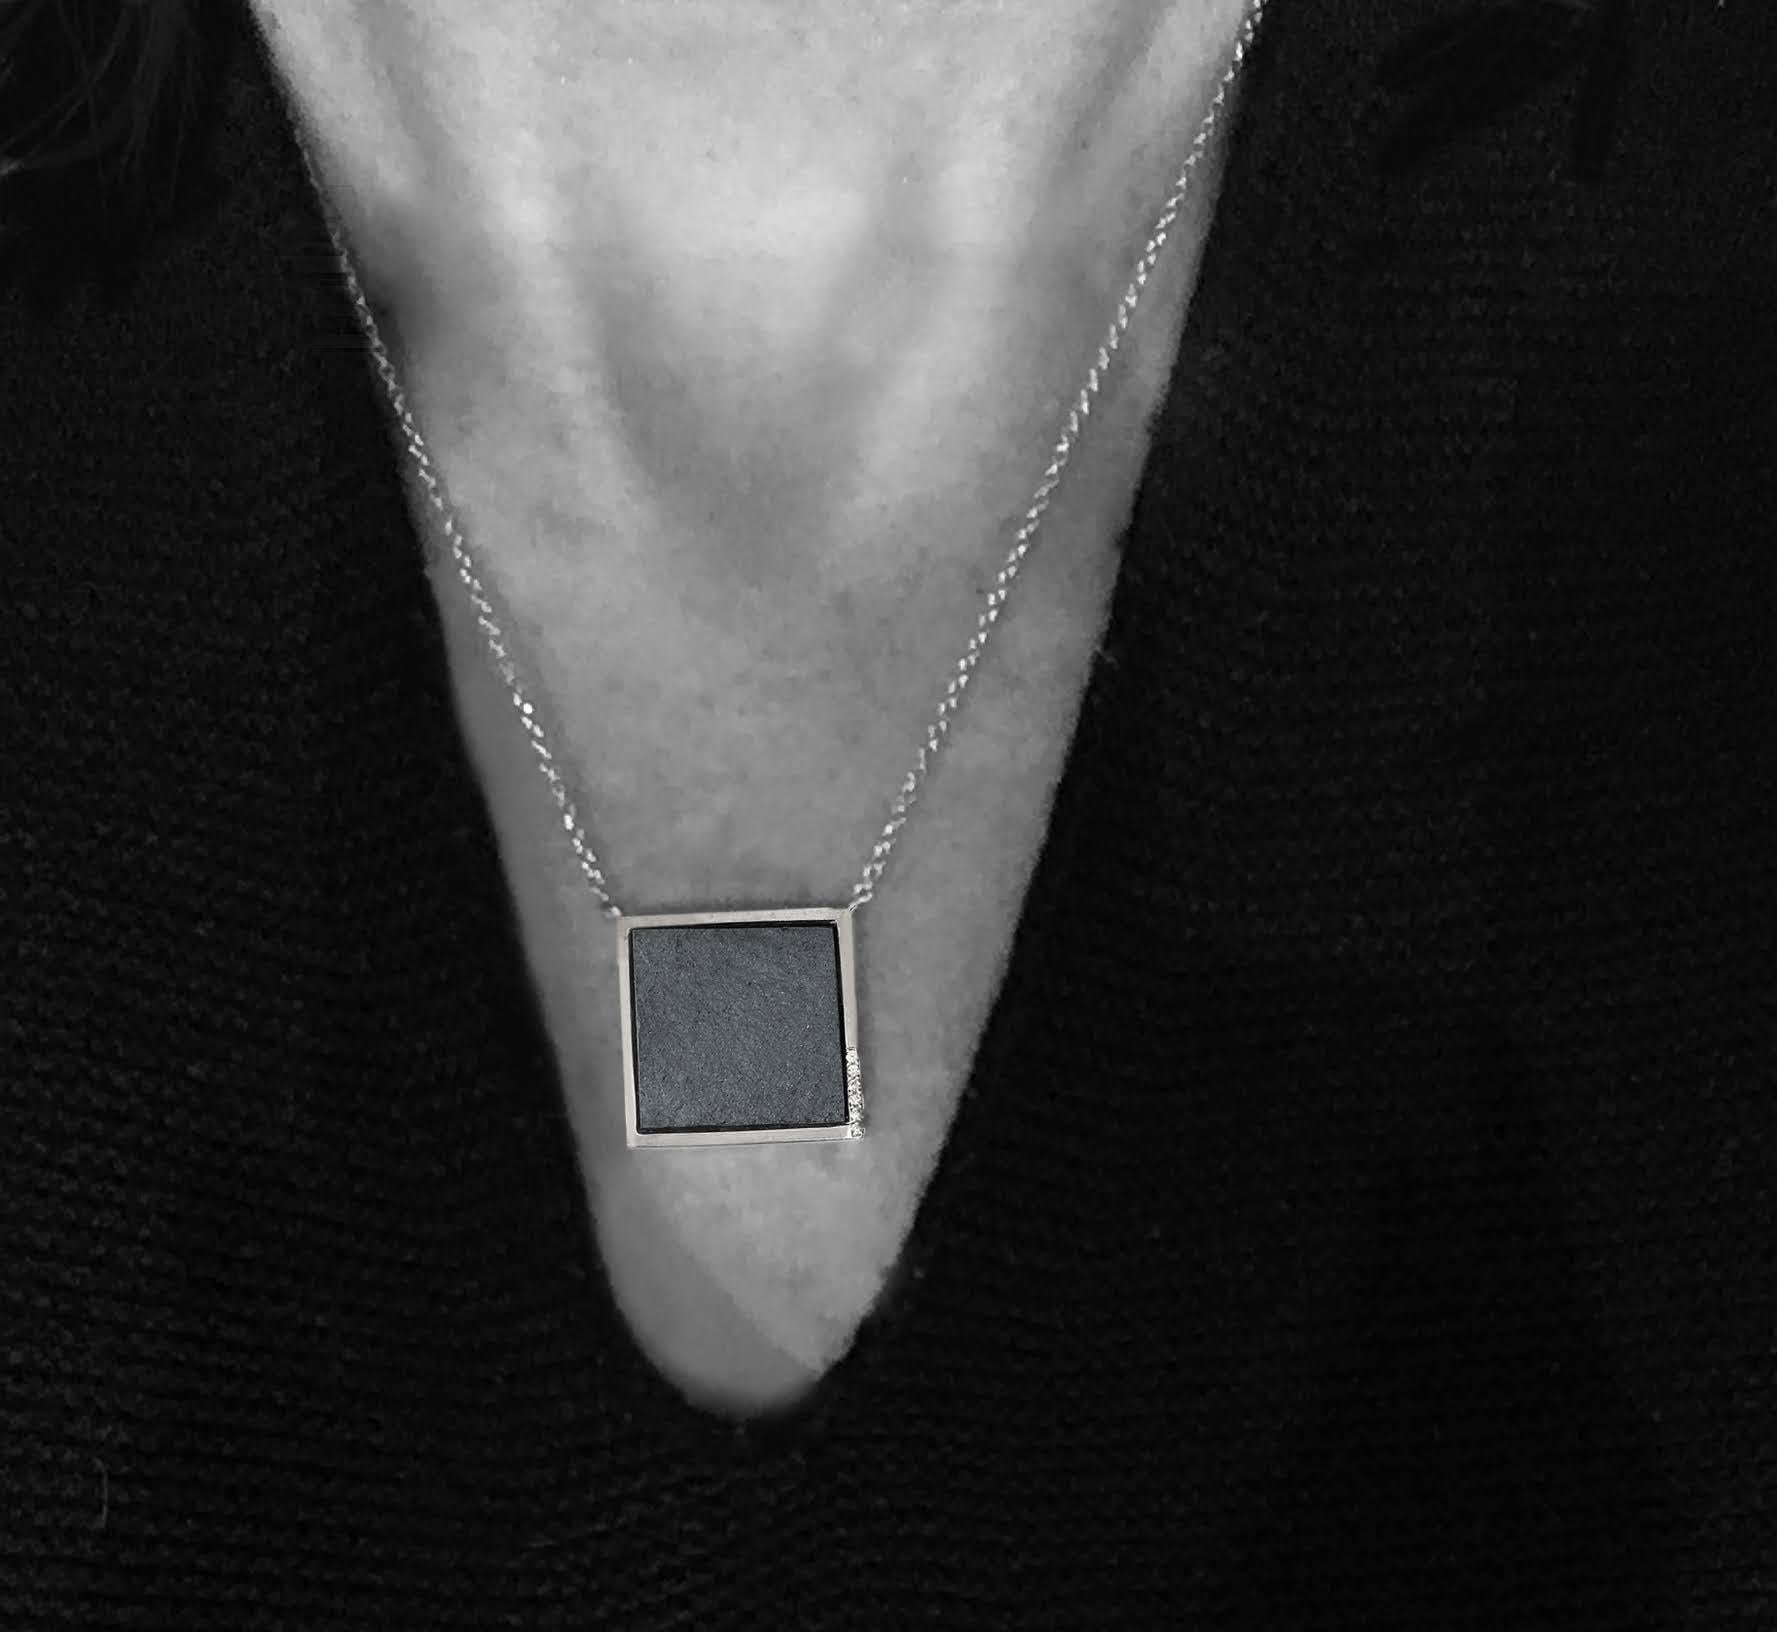 One-of-a-kind. Rough meets refined in this unusual Diamond Pave' in White Gold on Rough Hematite Square Pendant. This scrumptious square is set in a 14k white gold bezel contains approximately .05 pts F VS grade total diamond weight. Strung on an